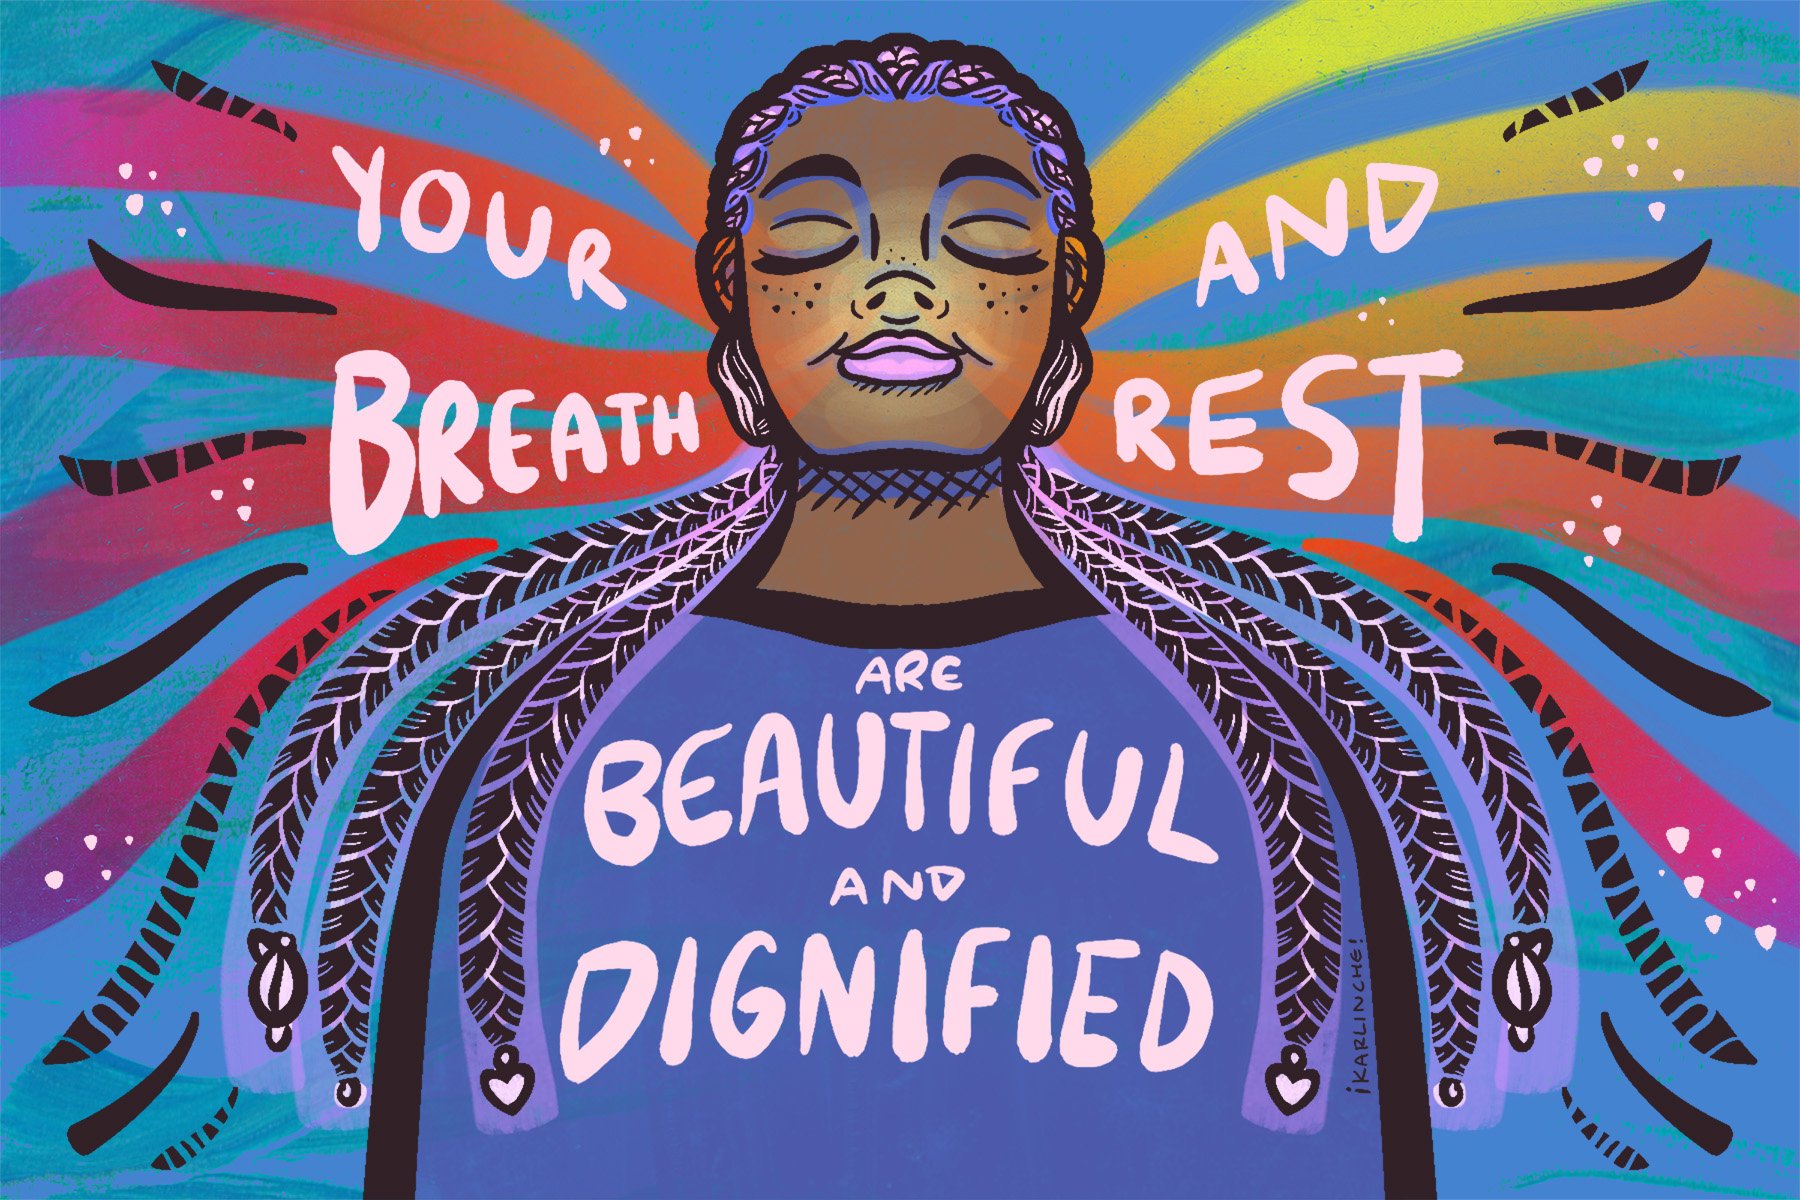 Your breath and rest are beautiful and dignified